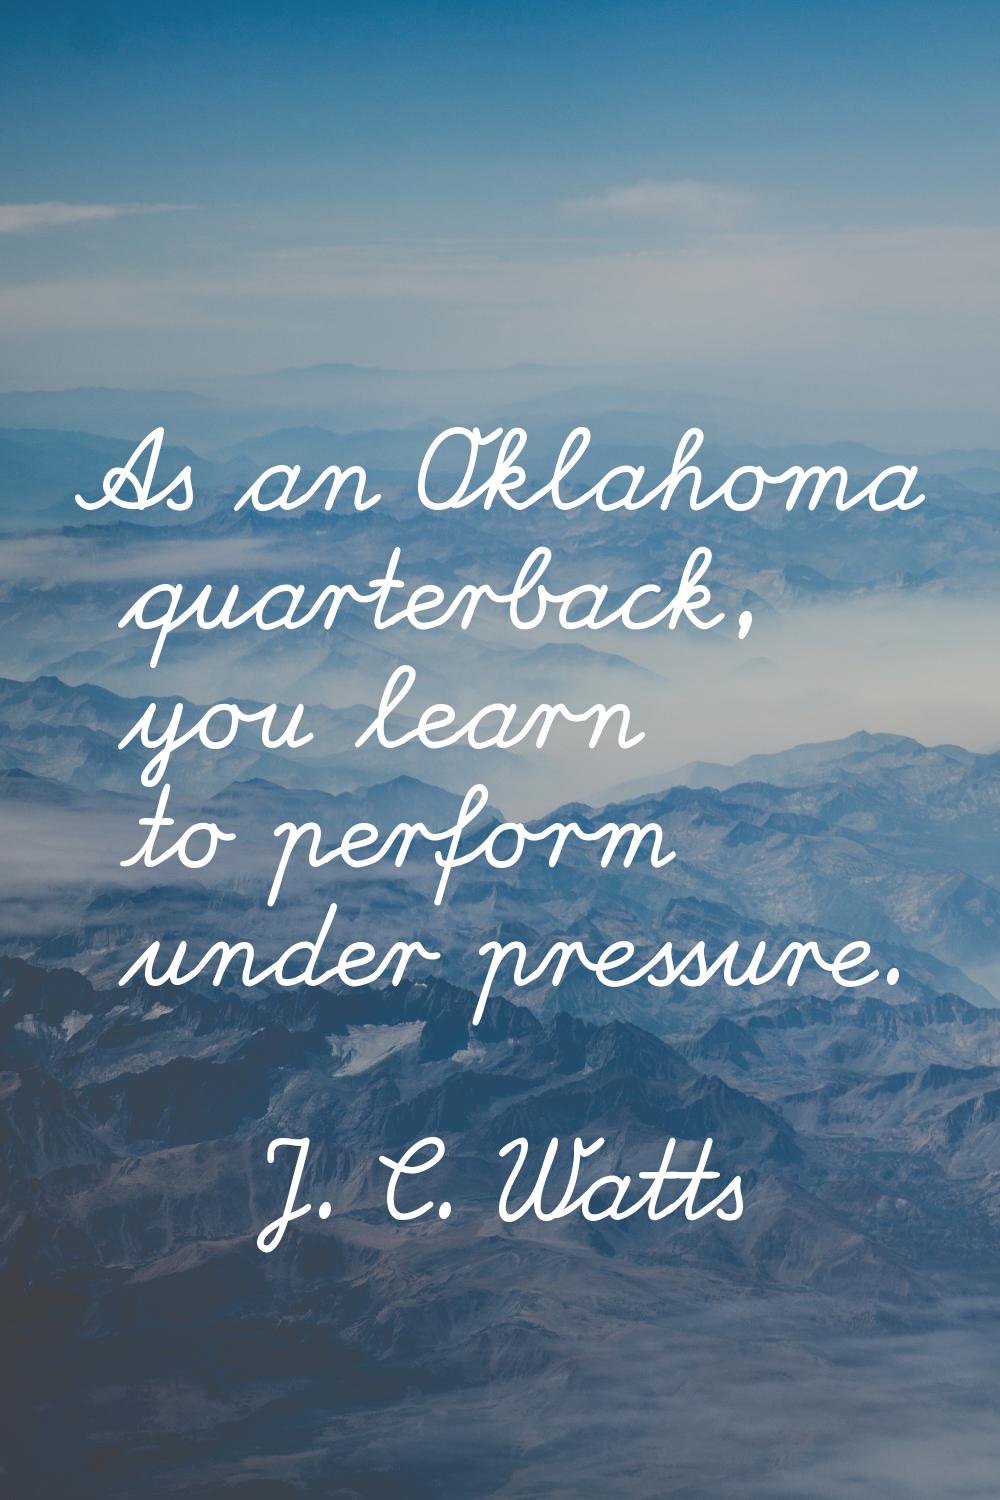 As an Oklahoma quarterback, you learn to perform under pressure.